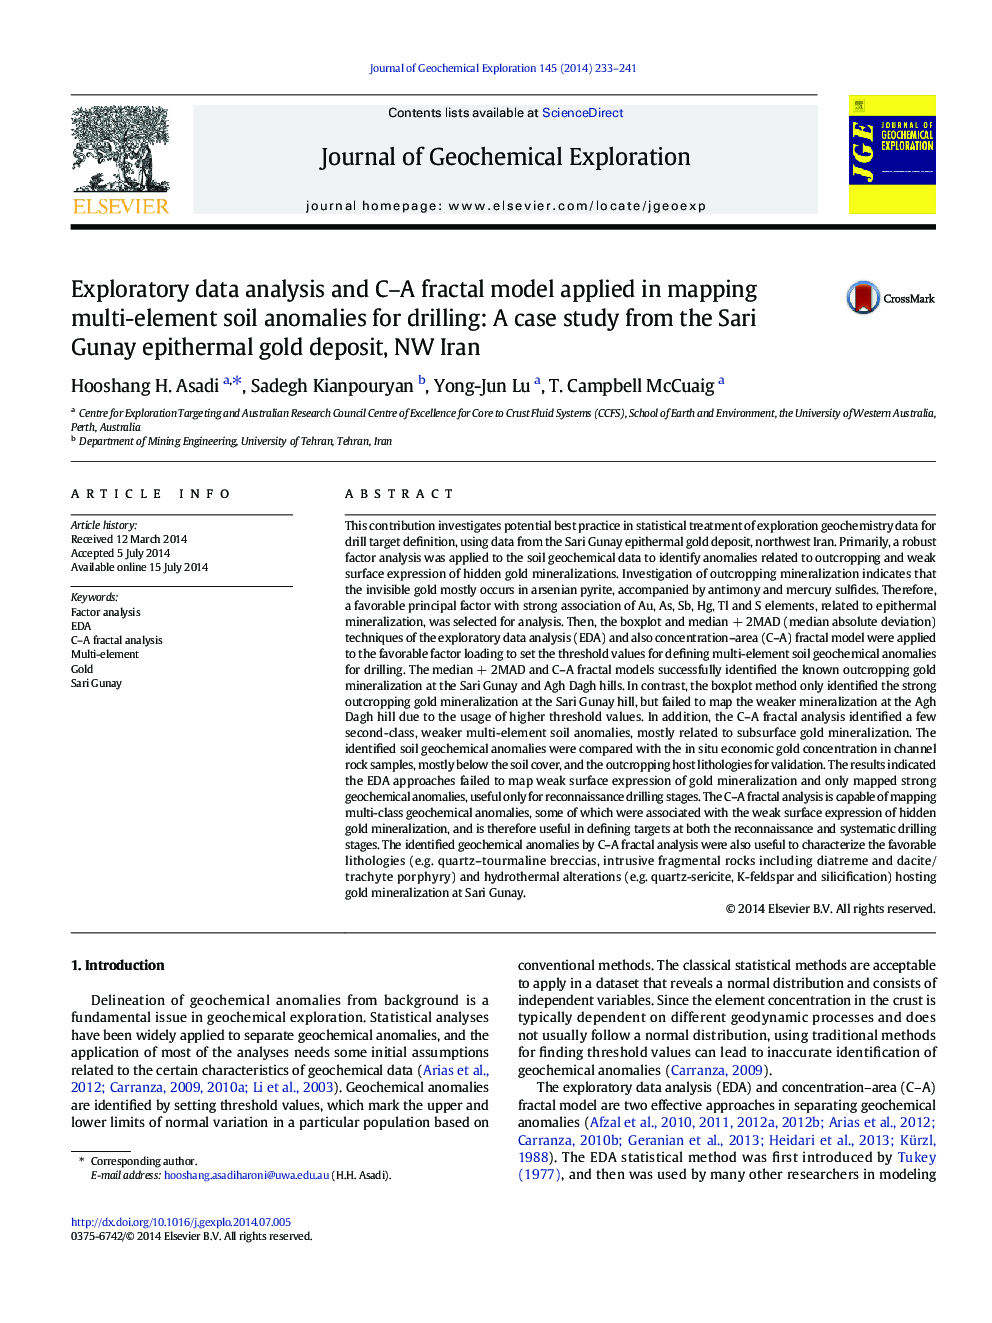 Exploratory data analysis and C-A fractal model applied in mapping multi-element soil anomalies for drilling: A case study from the Sari Gunay epithermal gold deposit, NW Iran